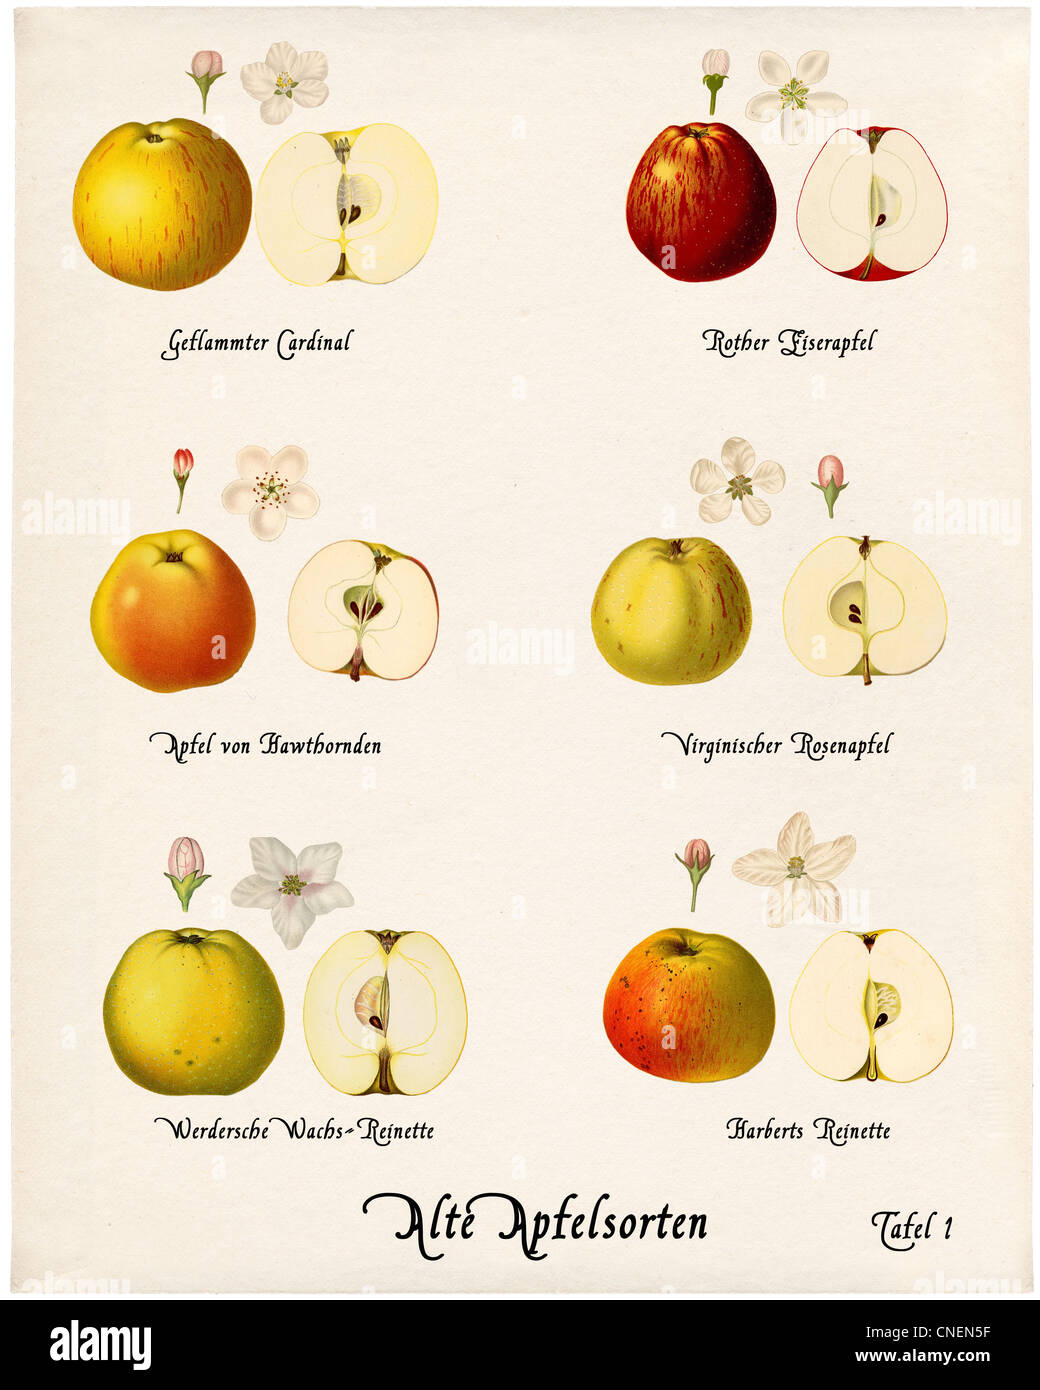 Collage with illustrations of apple varieties in historic style on old paper Stock Photo